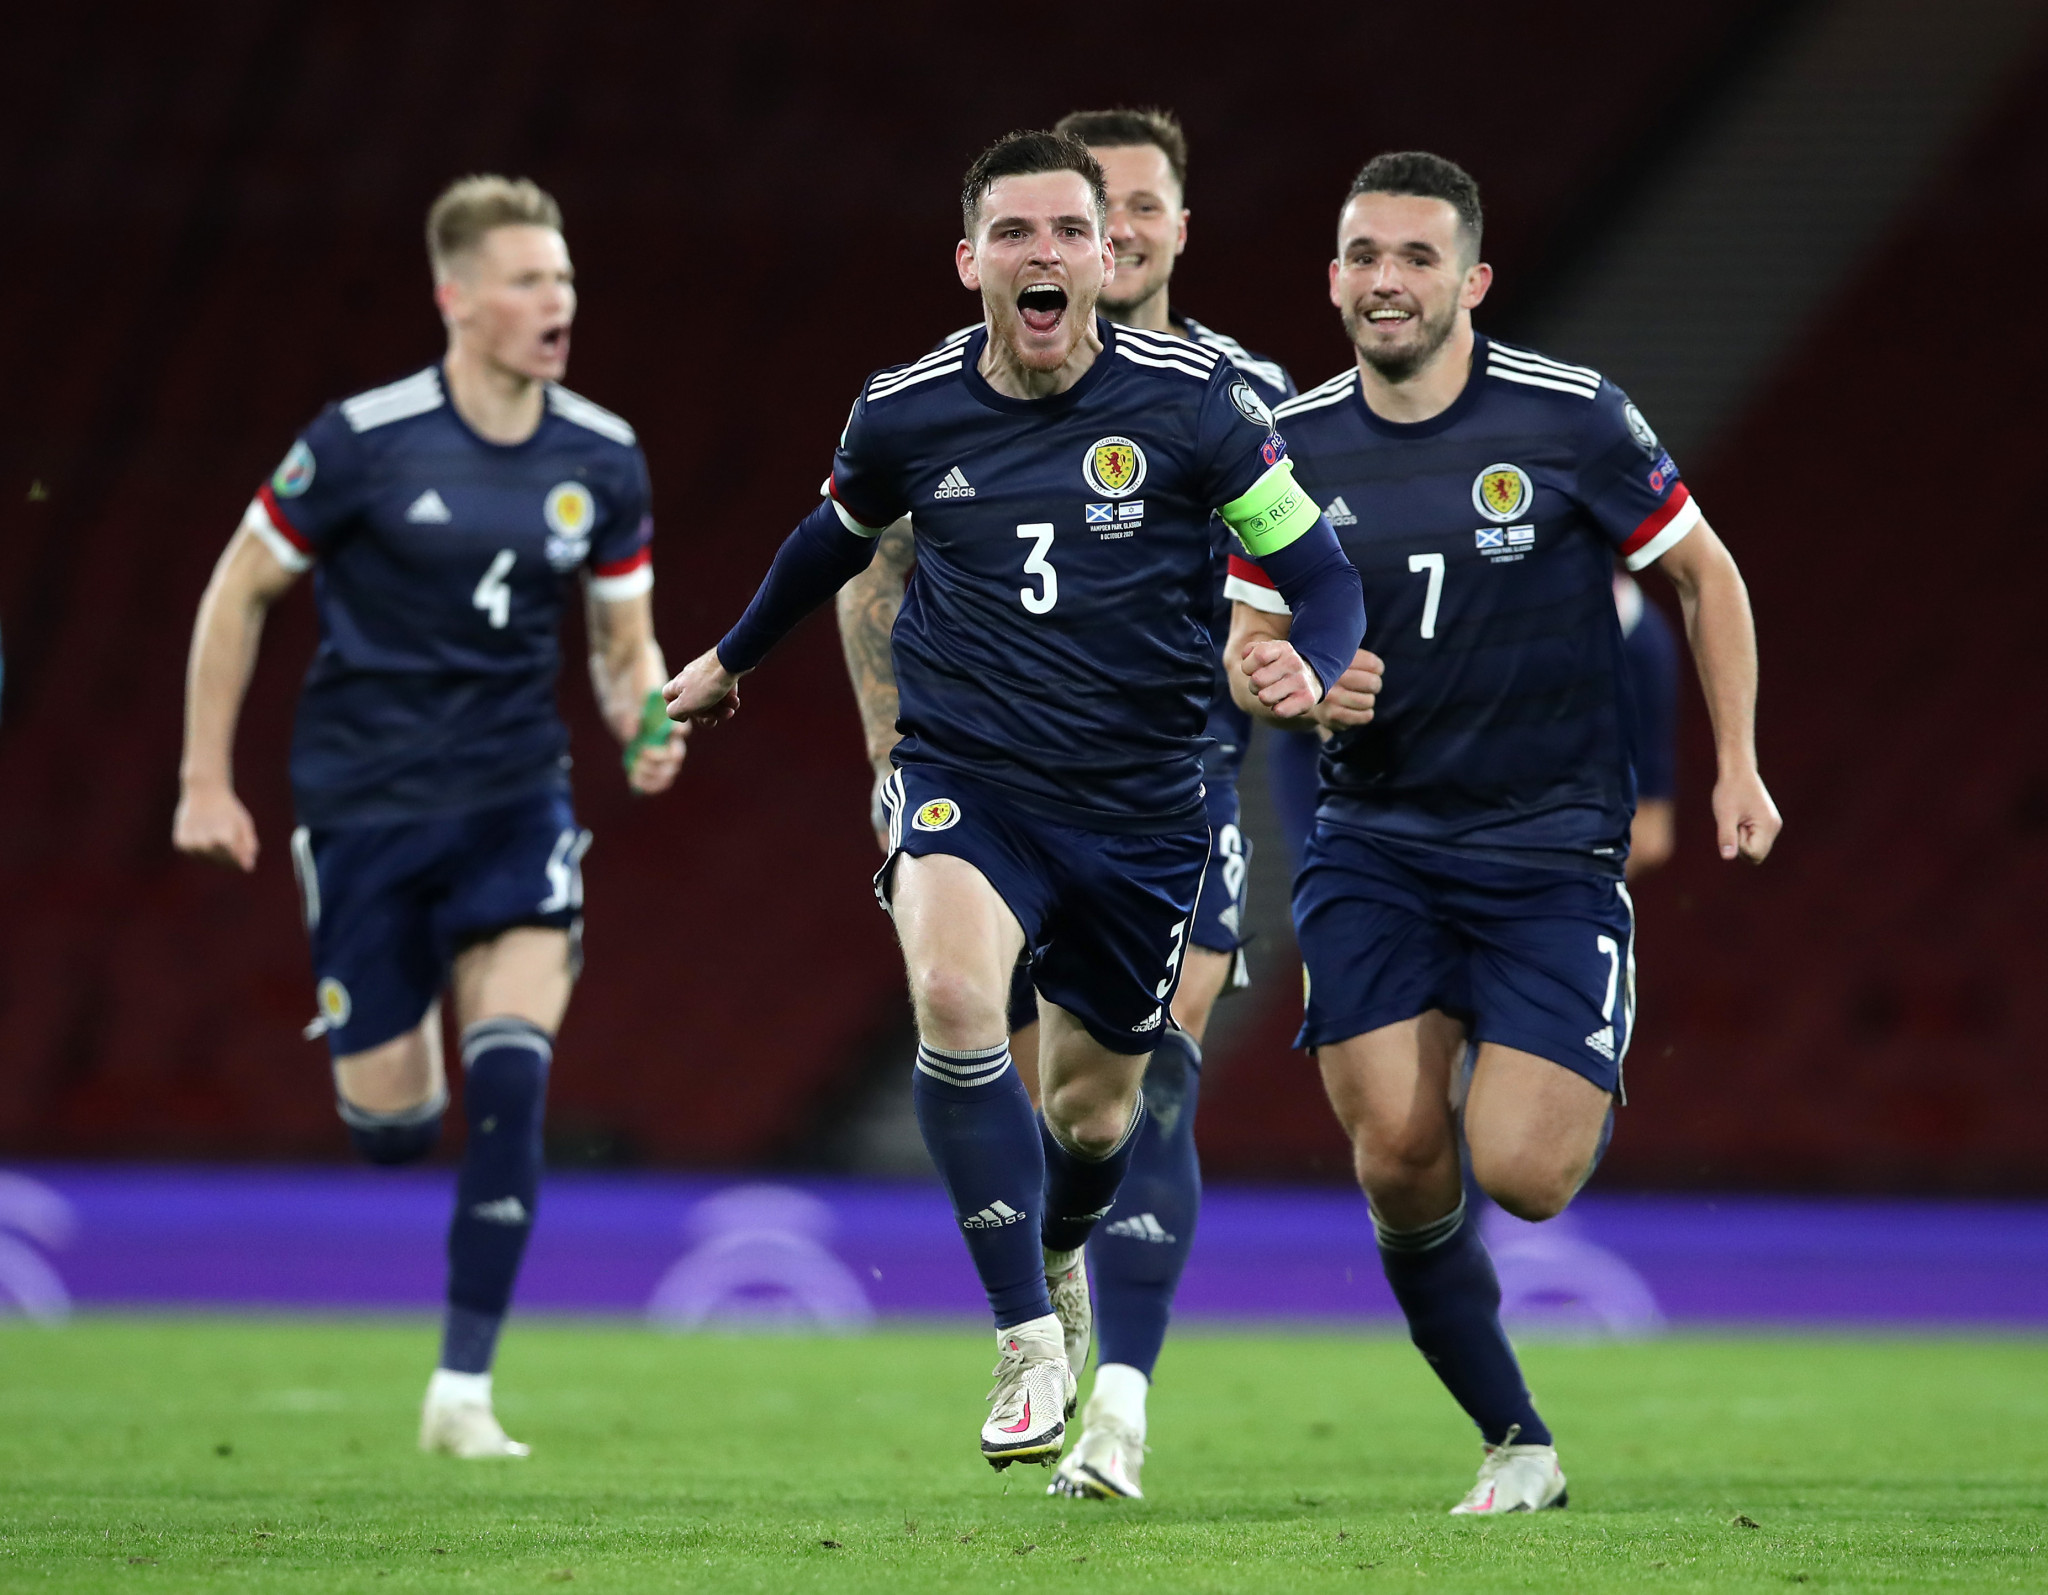 Scotland were due to play Ukraine in a World Cup qualifier playoff later this month, but will now play Poland in a friendly on that date instead ©Getty Images